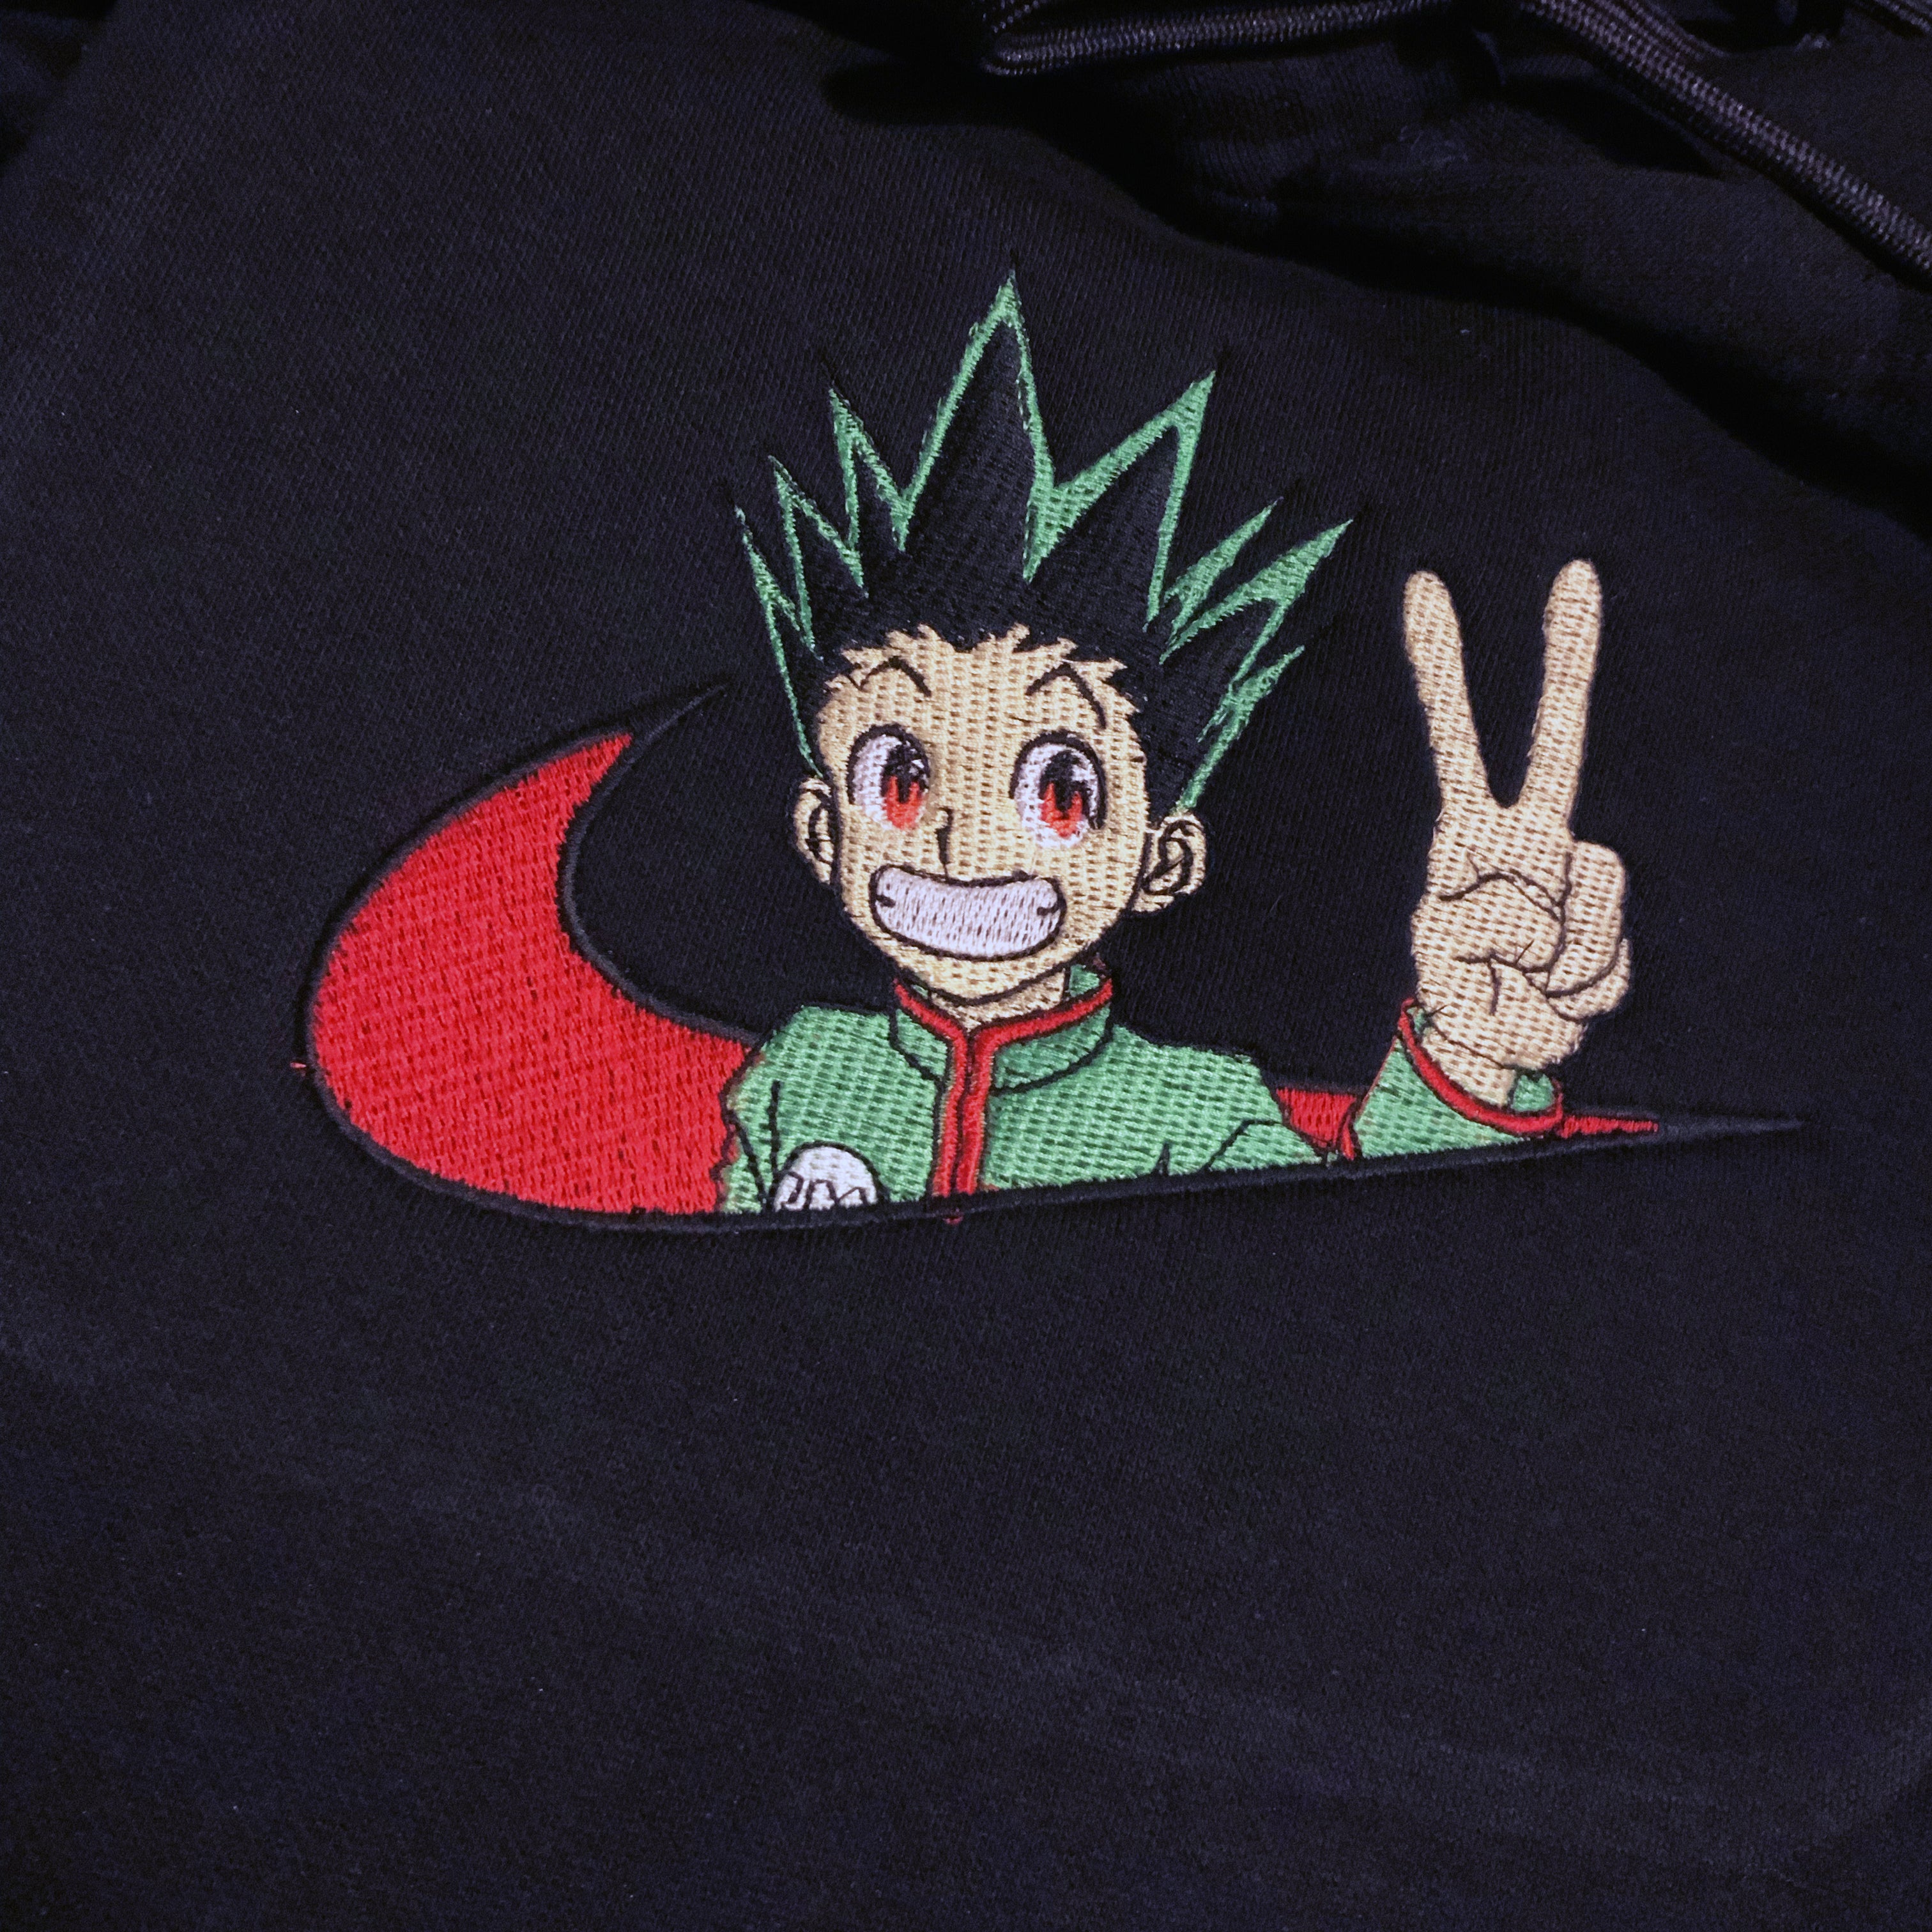 LIMITED HUNTER X HUNTER GON REDUX X EMBROIDERED ANIME HOODIE